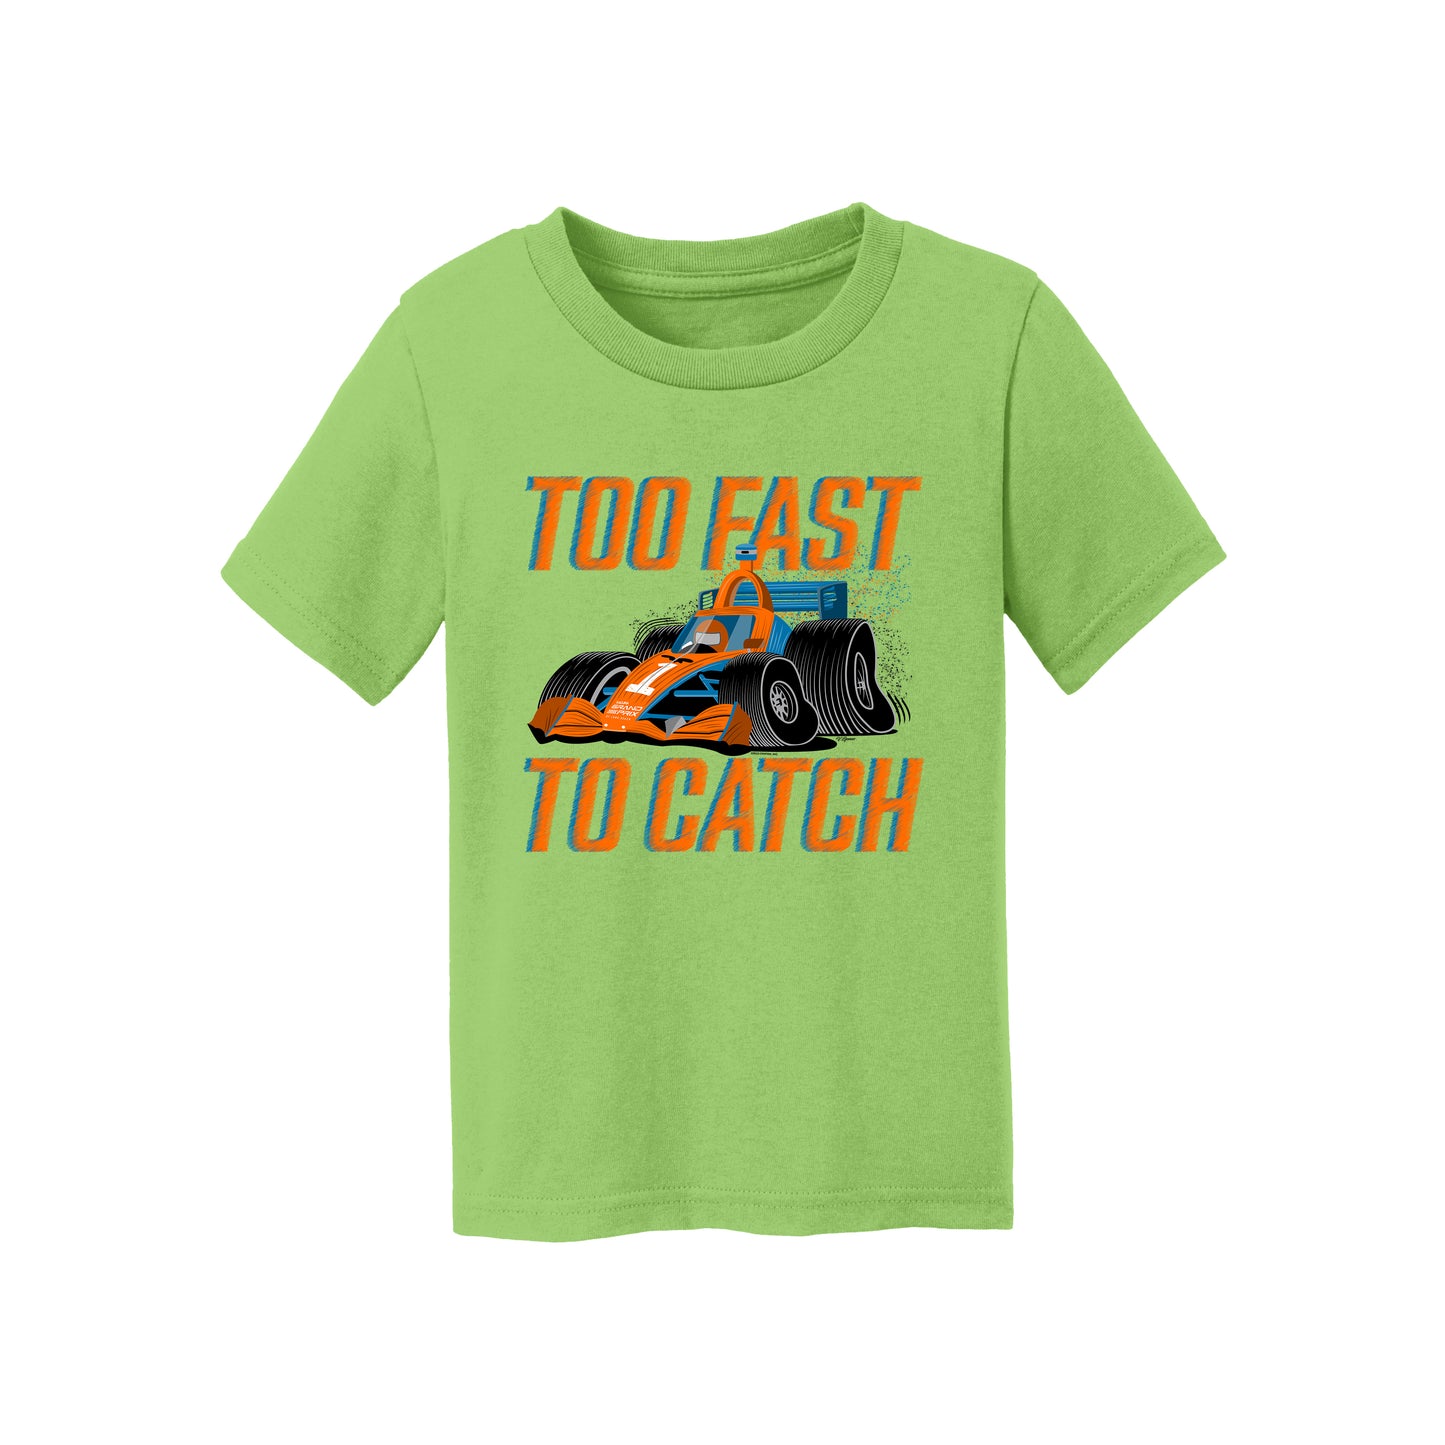 Too Fast To Catch Toddler Tee - Lime